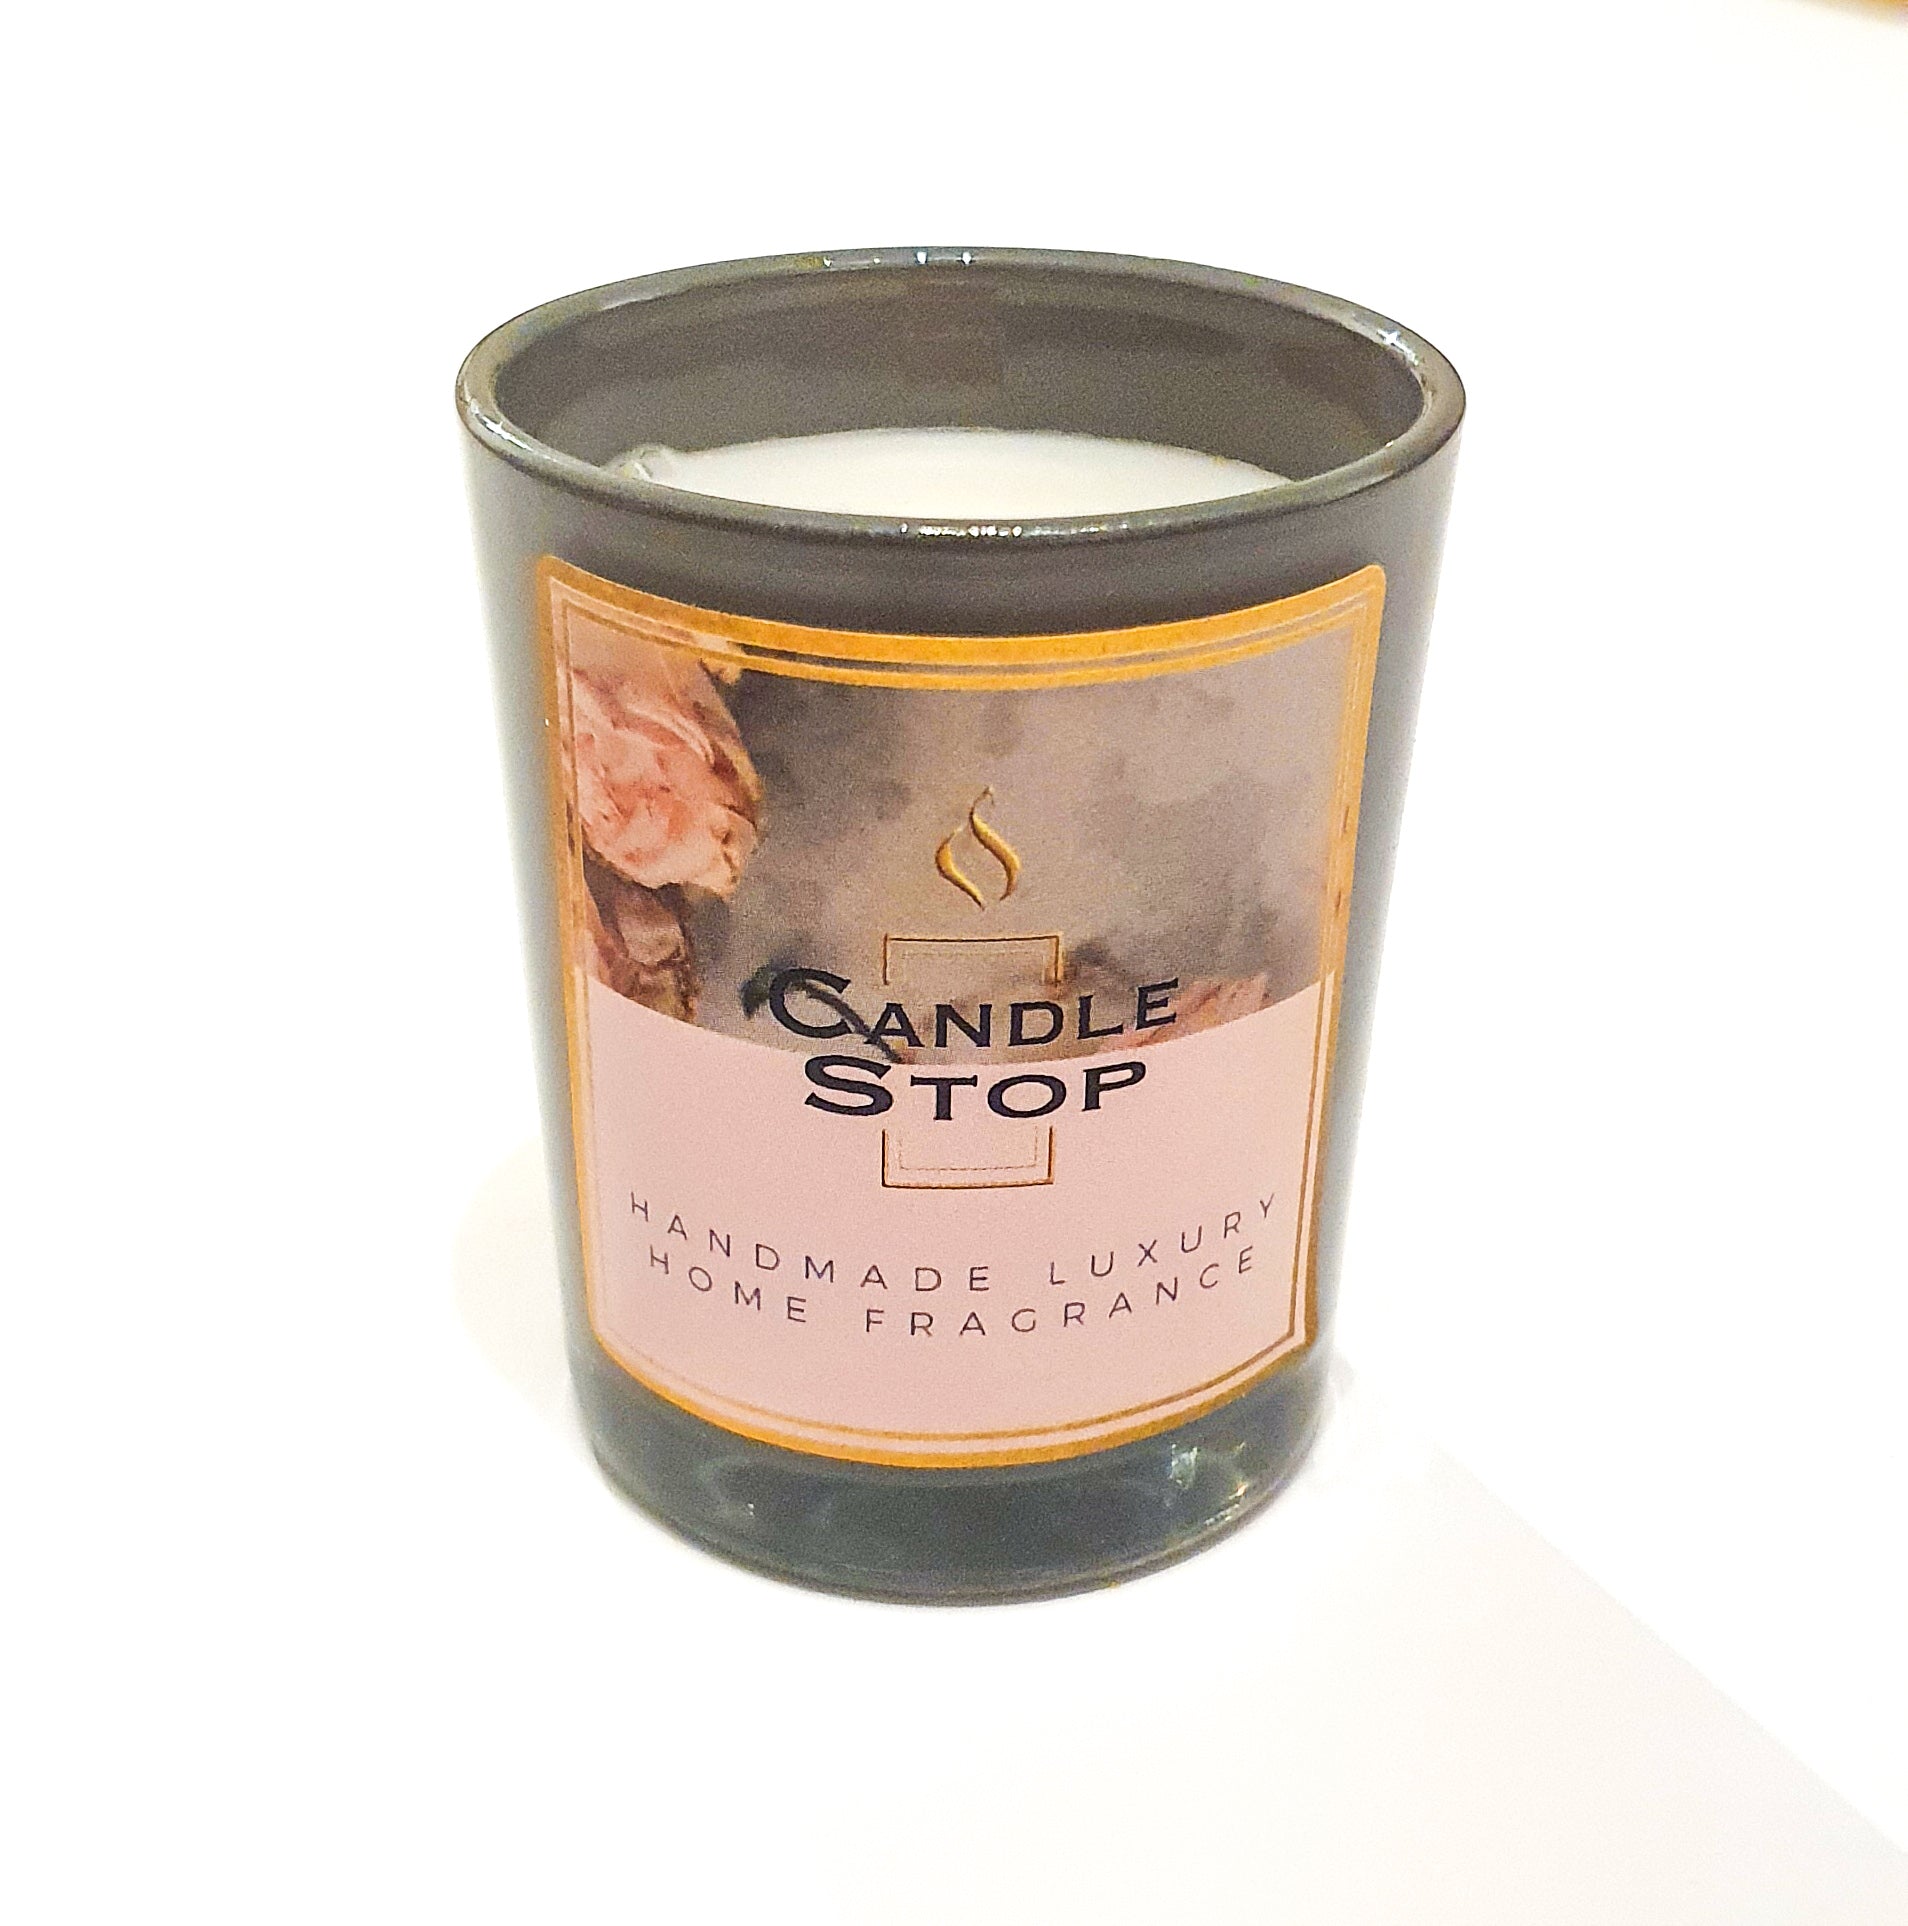 Black Orchid Candle